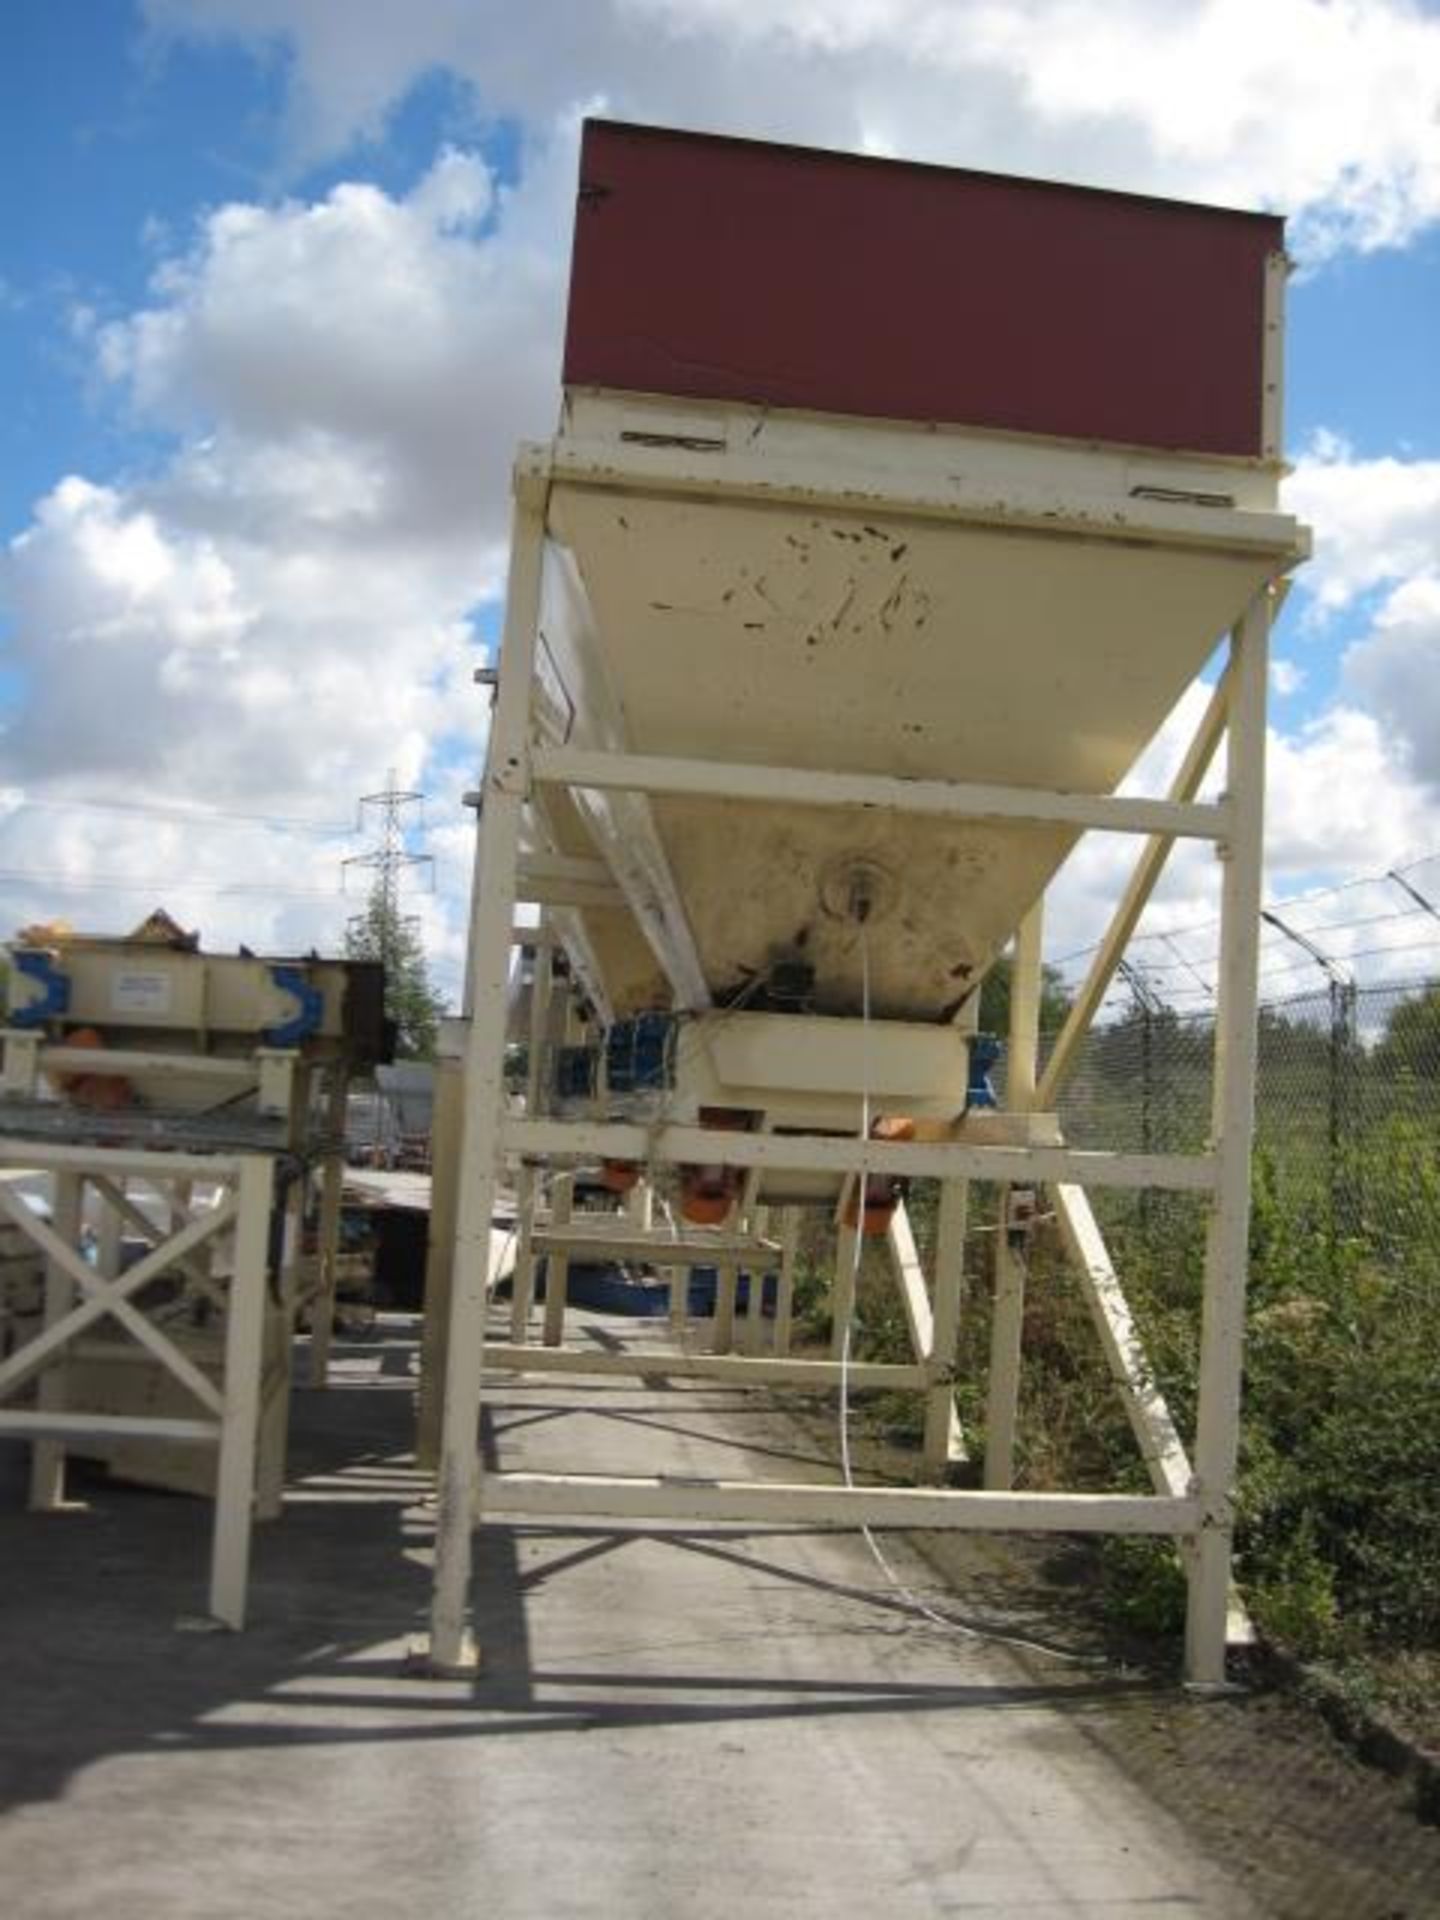 Reception Hopper, approx. 2.4M x 3.3M x 4.5M high with Applied Vibration Ltd tray feeder mounted - Image 6 of 7